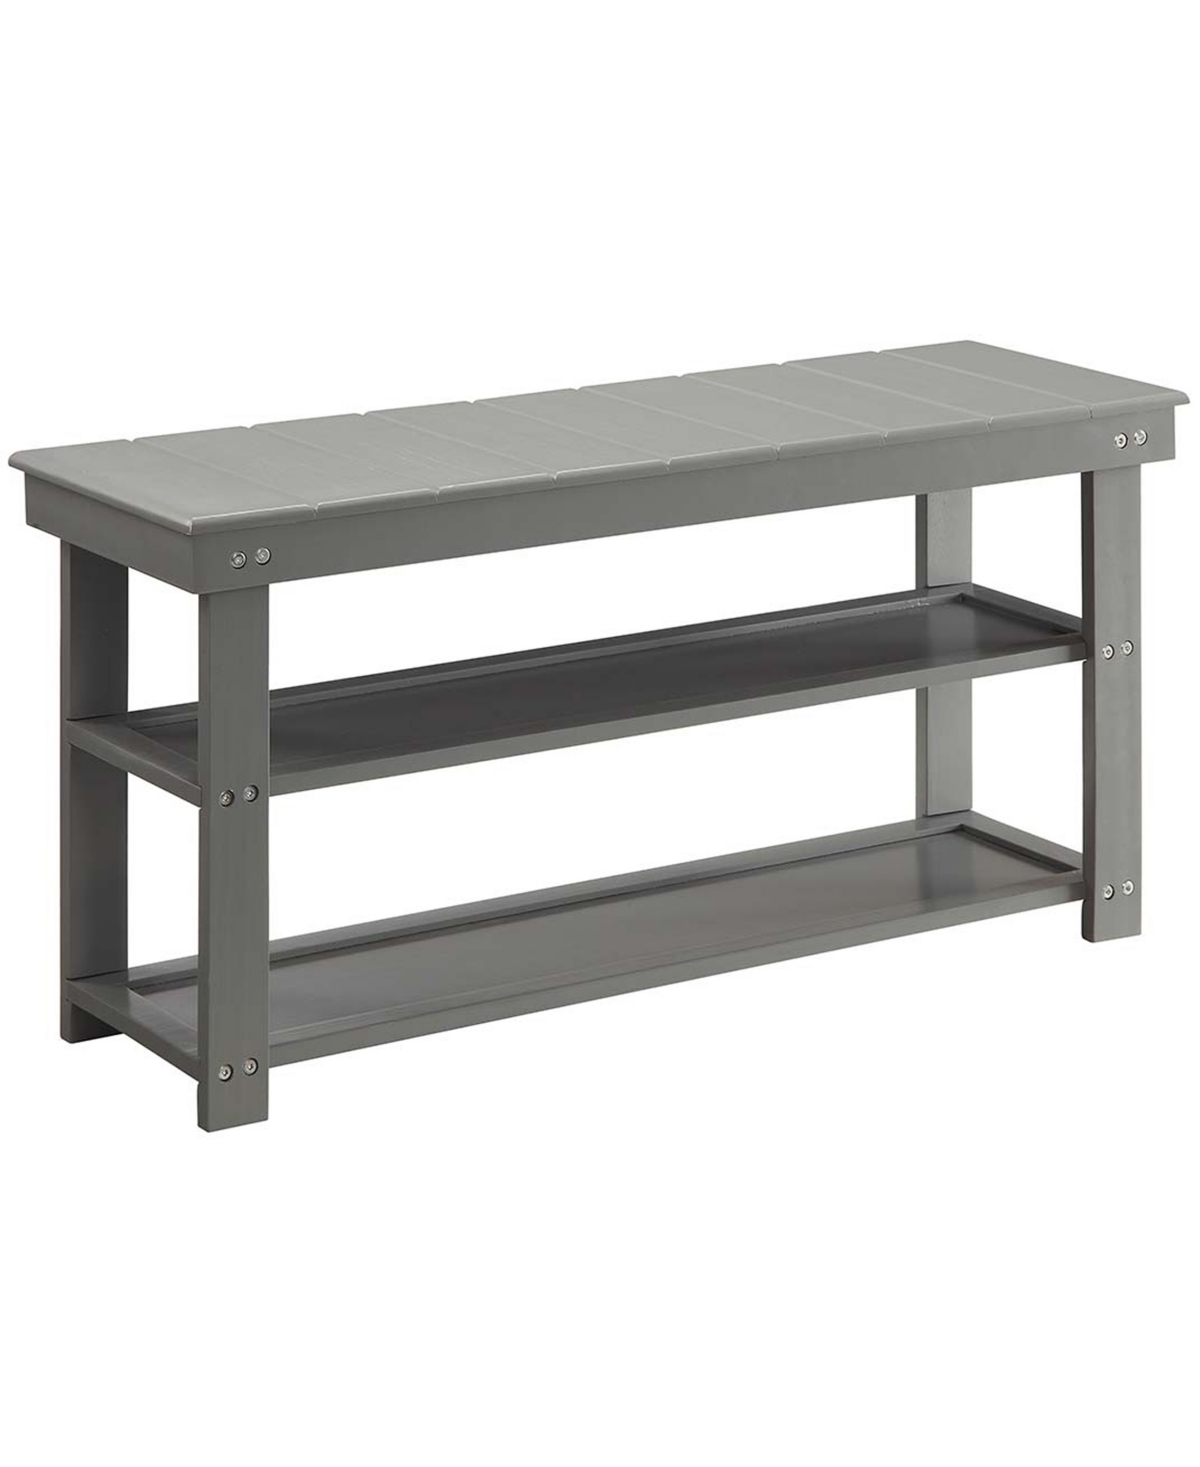 Convenience Concepts 35.5" Mdf Oxford Utility Mudroom Bench With Shelves In Gray